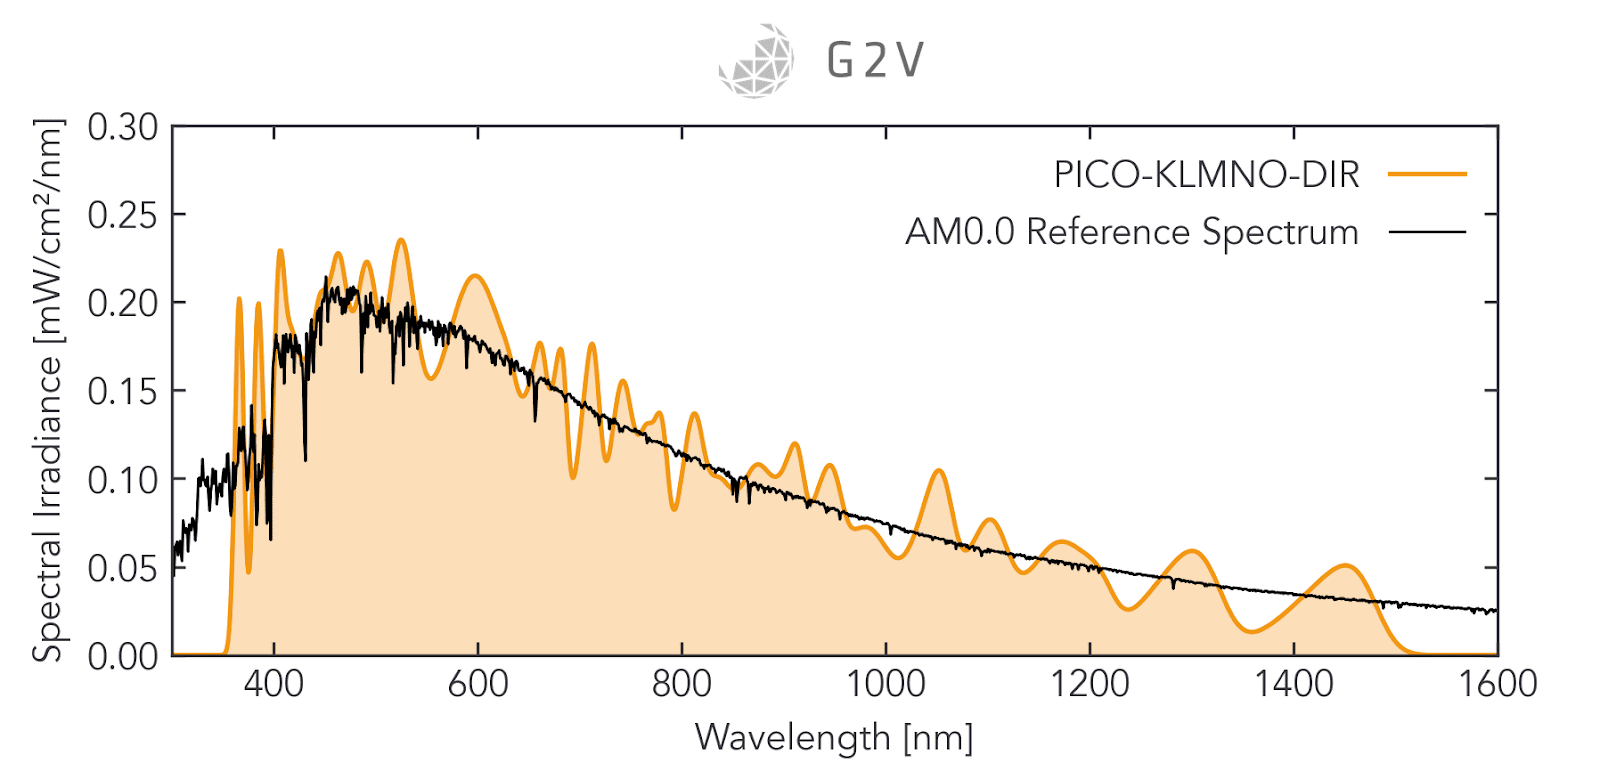 An example AM0 spectral output of an LED solar simulator (the G2V Pico) demonstrating spectral output from 350 nm 1500 nm. This spectral range can be wide enough for many applications.